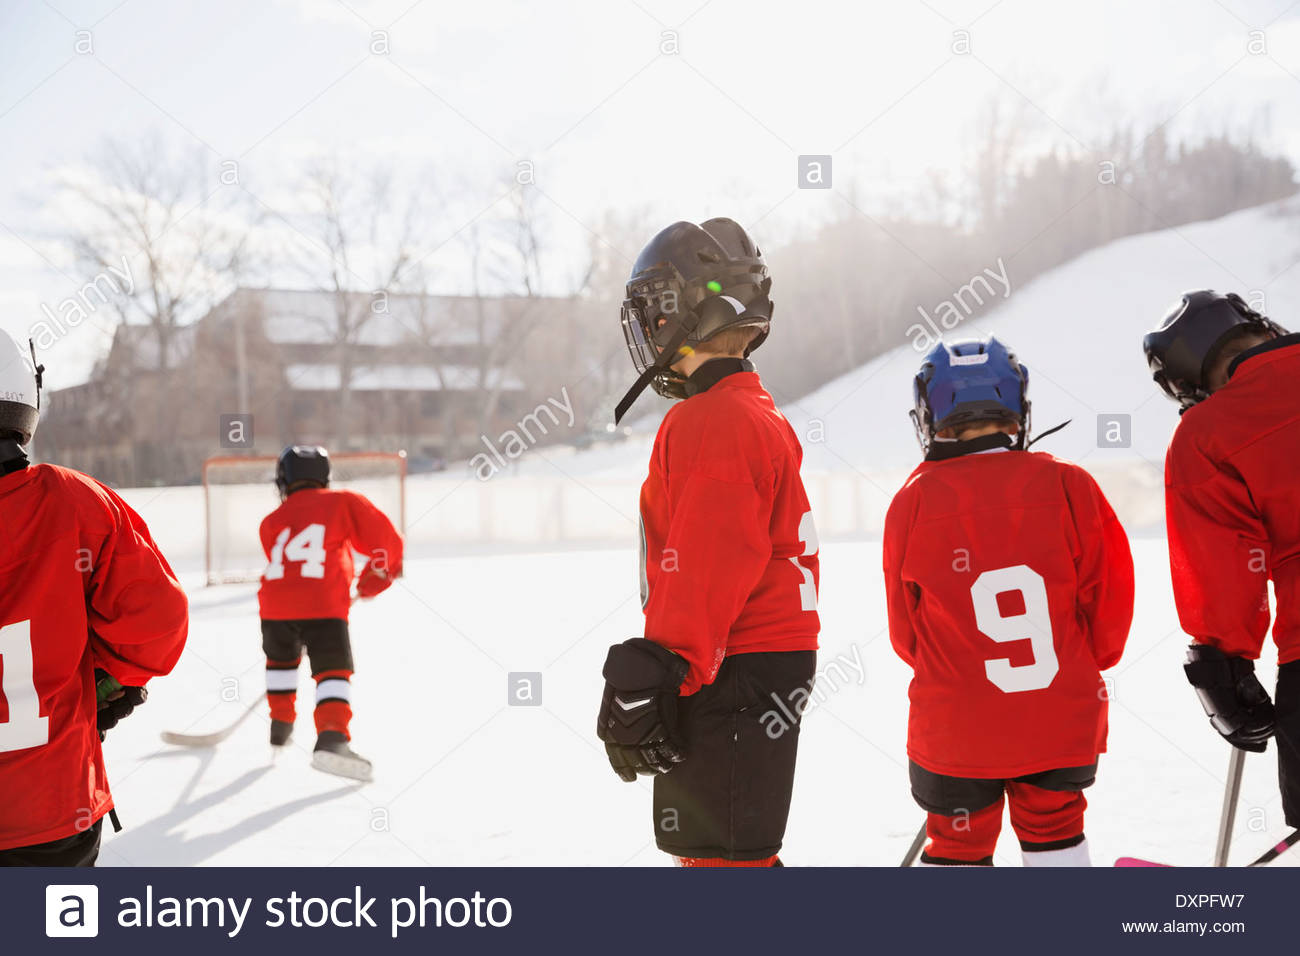 Hockey Player Standing on the Ice Rink while Holding a Stick · Free Stock  Photo